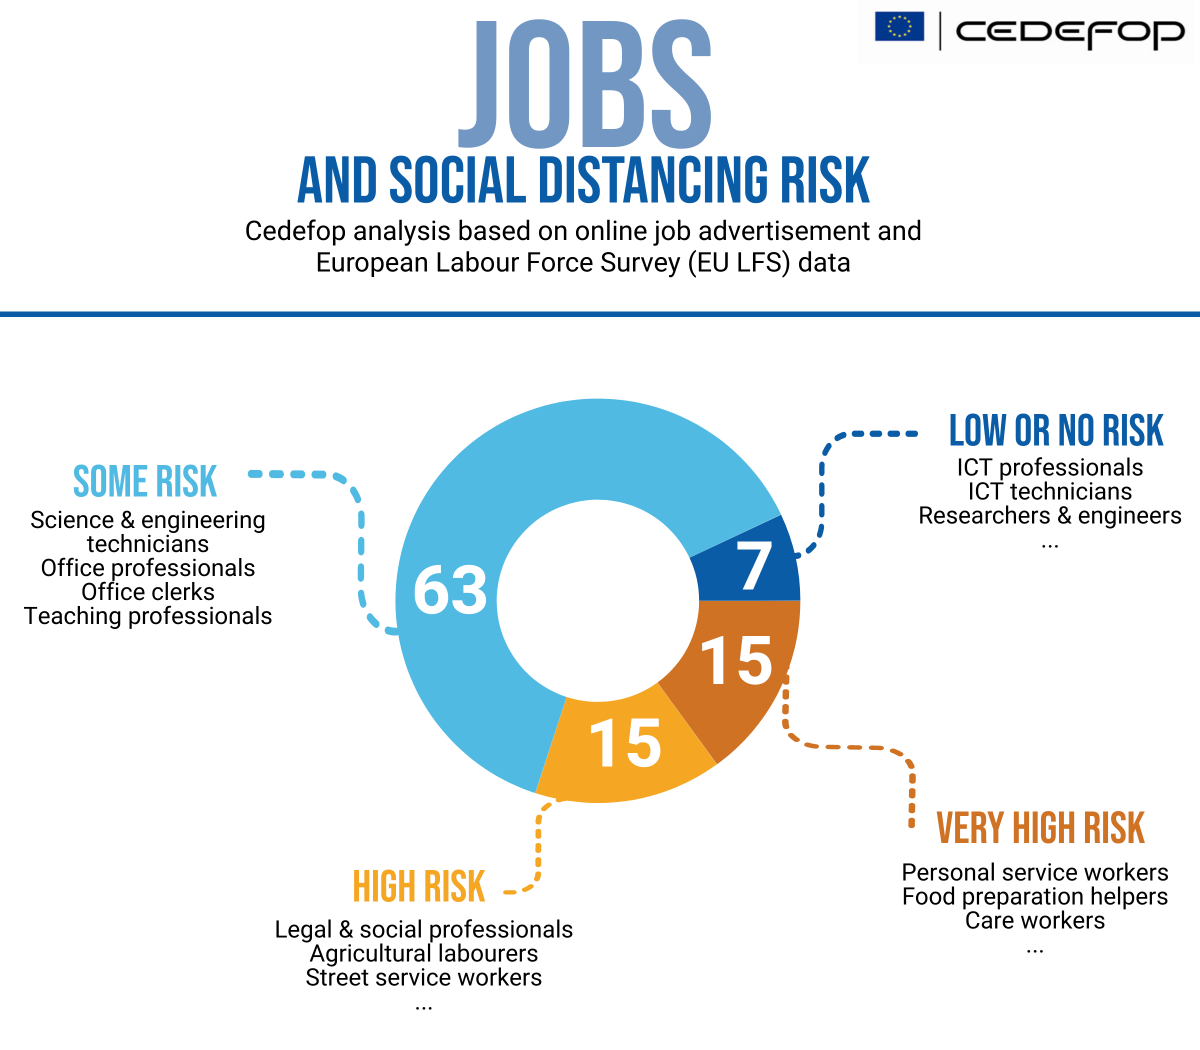 Jobs and social distancing risk - Cedefop analysis based on online job advertisement and European Labour Force Survey (LFS) data